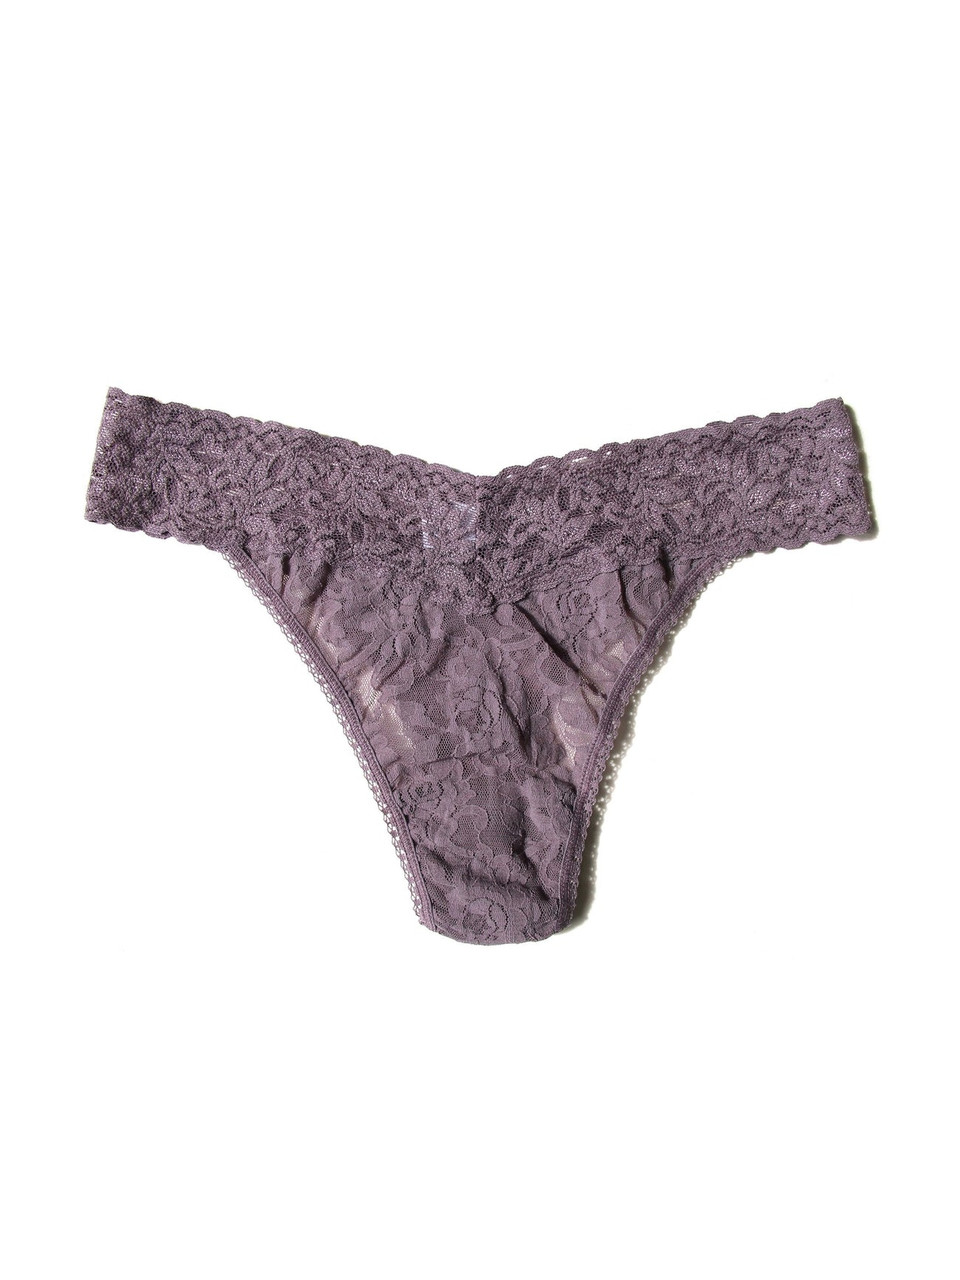 Signature Lace Thong- Dusk - Monkee's of Ocean City